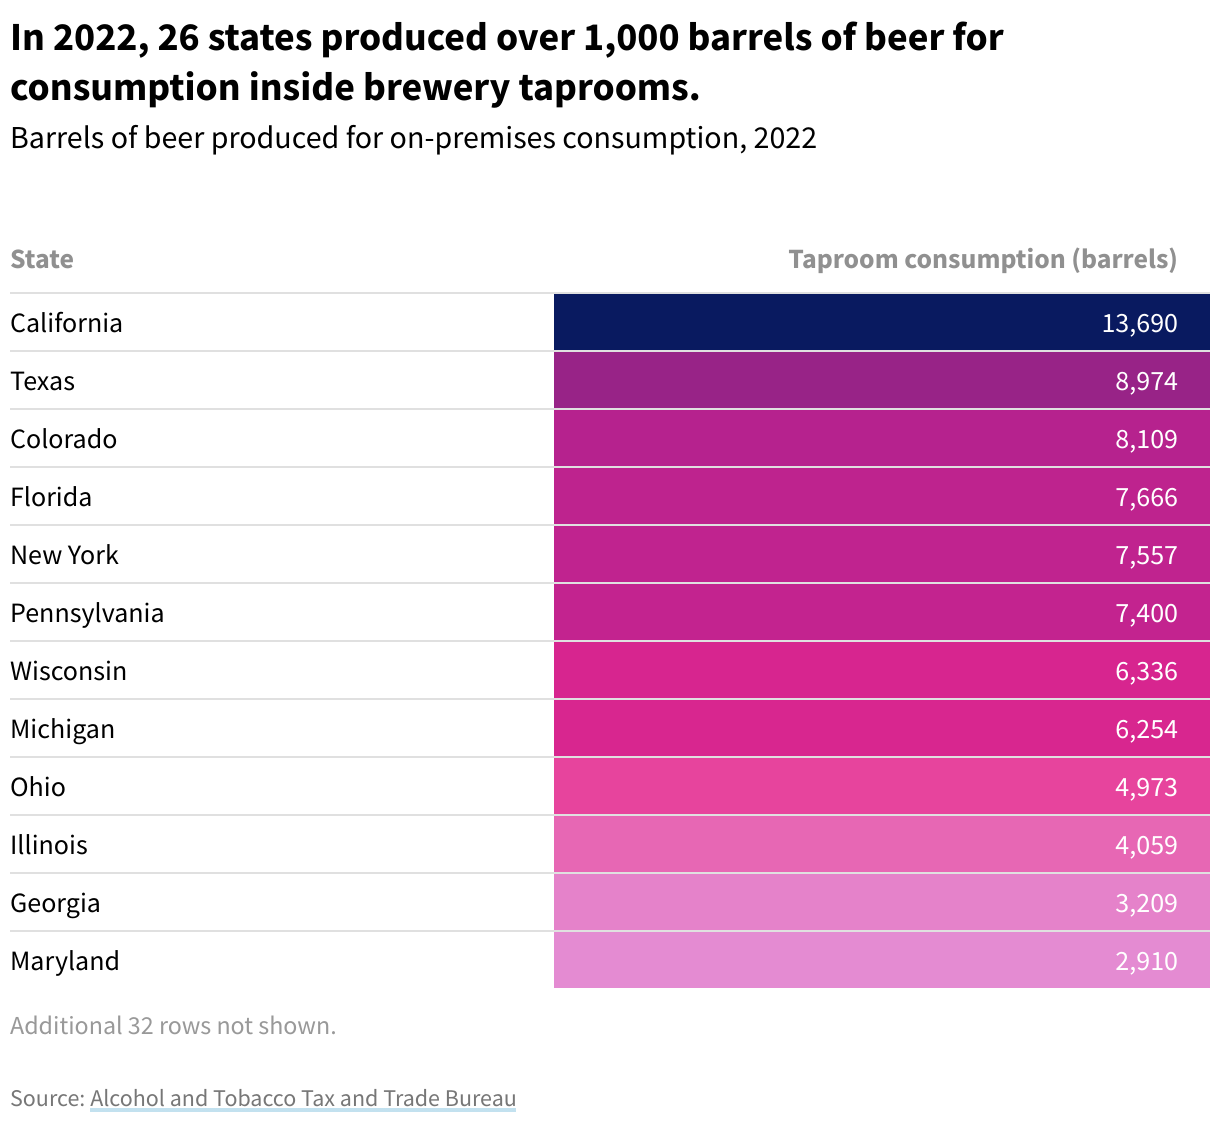 Table showing the number of barrels of beer produced for taproom consumption by US state. California, Texas, and Colorado produced the most. 